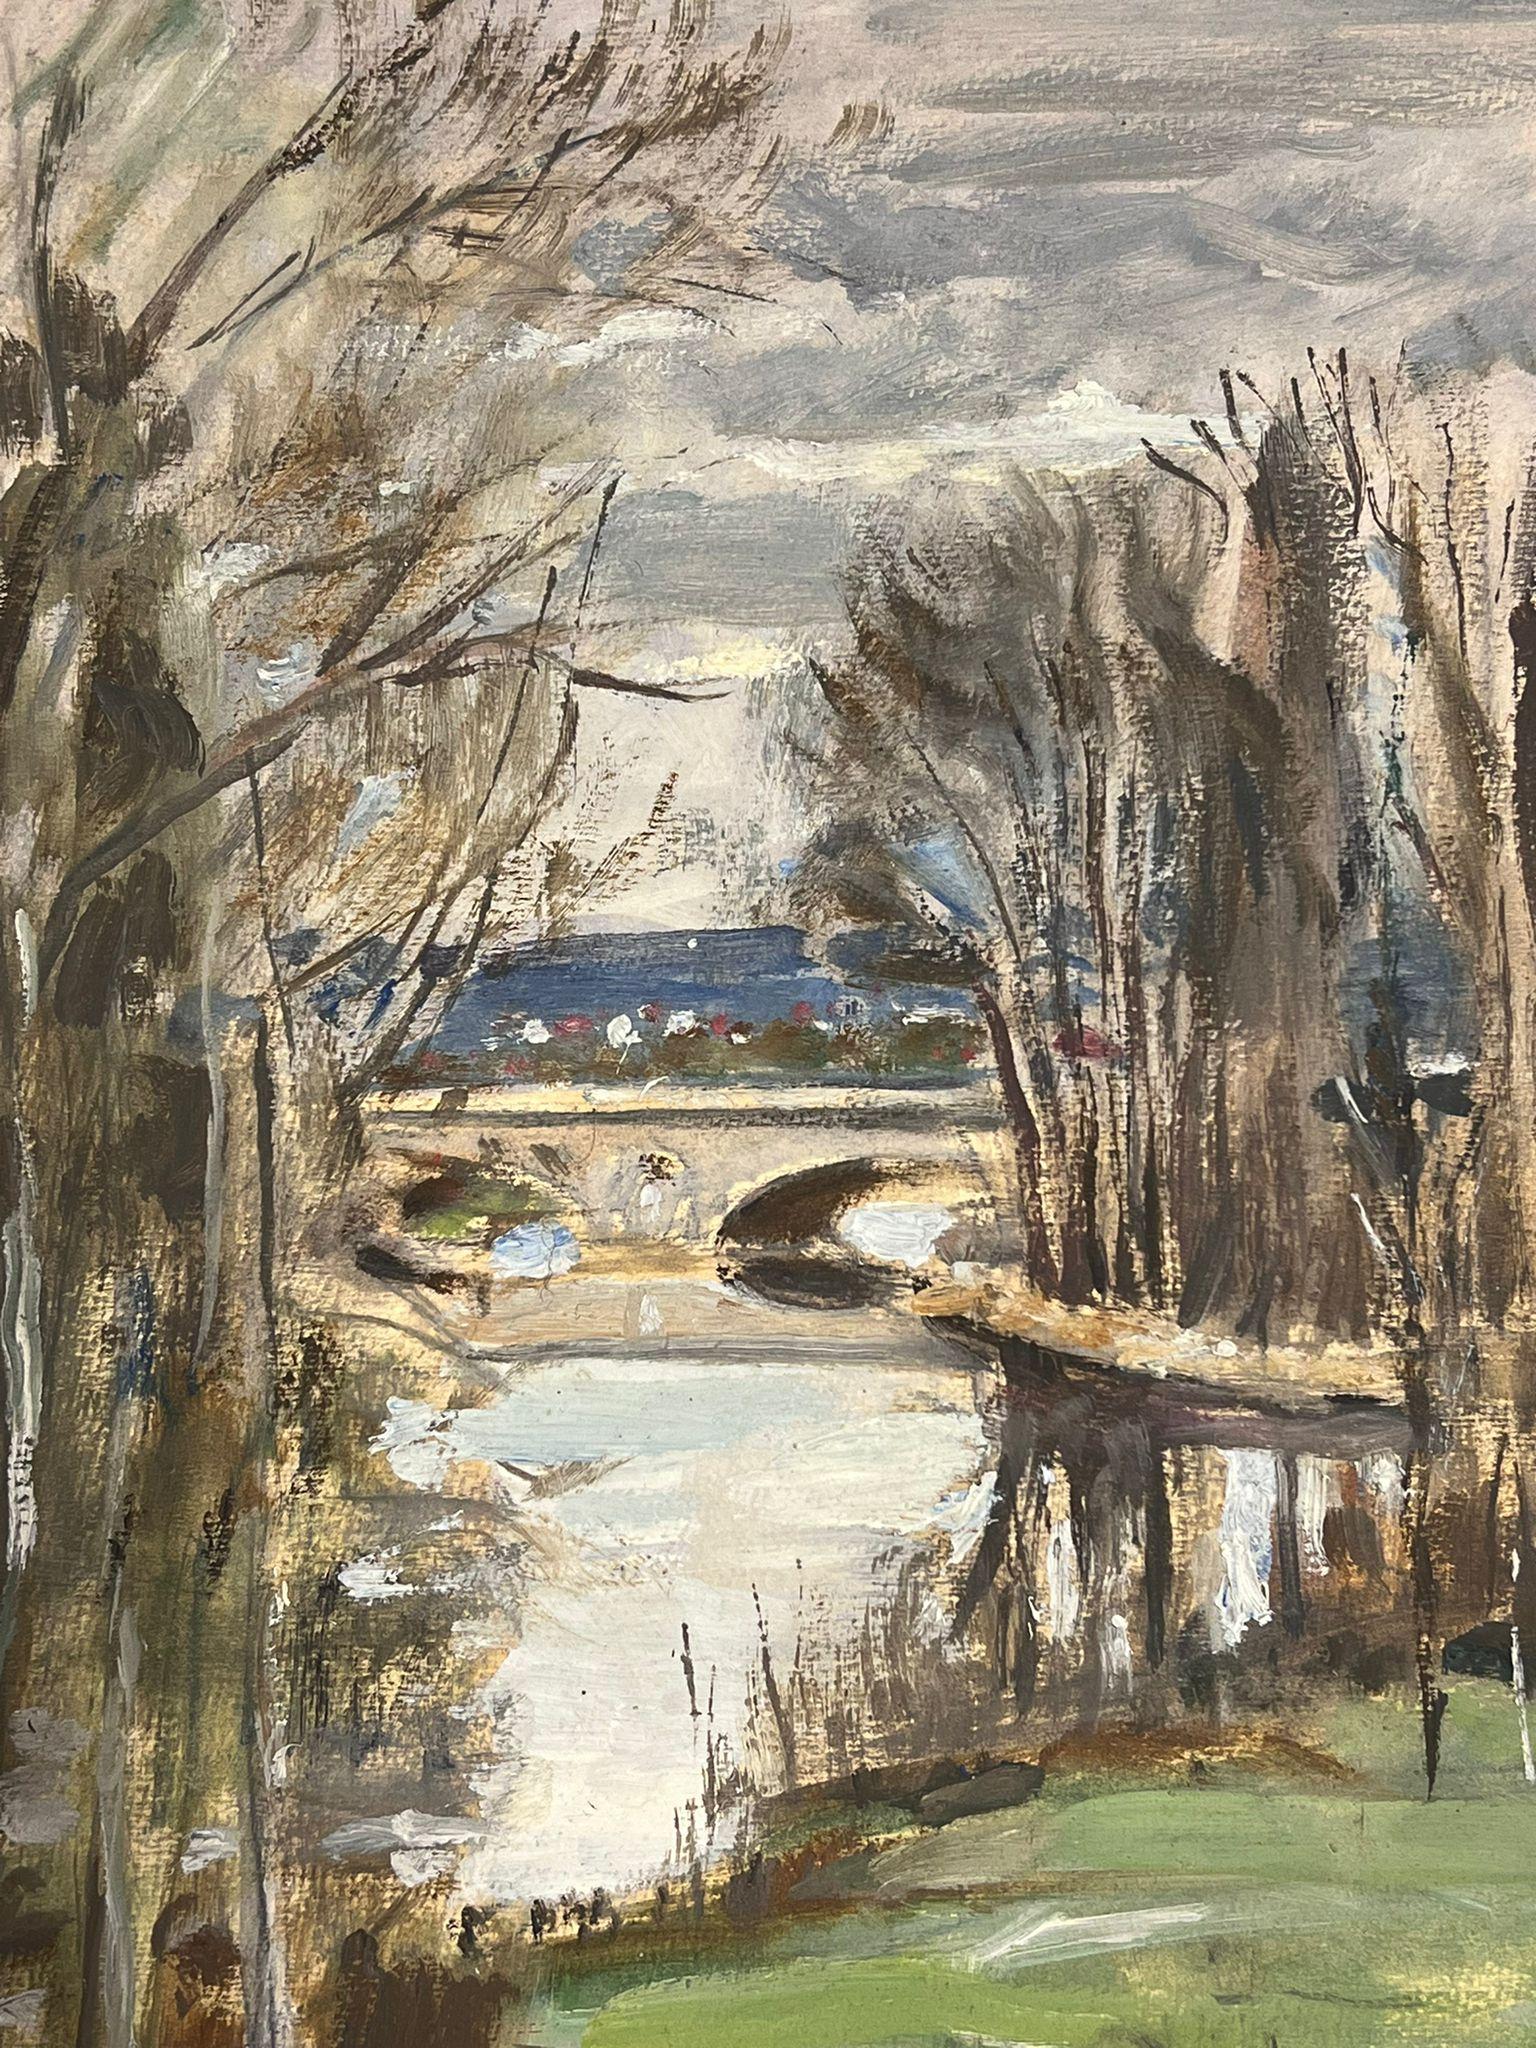 River Reflection 
by Louise Alix, French 1950's Impressionist 
gouache on artist paper, unframed
painting: 11 x 9 inches
provenance: from a large private collection of this artists work in Northern France
condition: original, good and sound condition